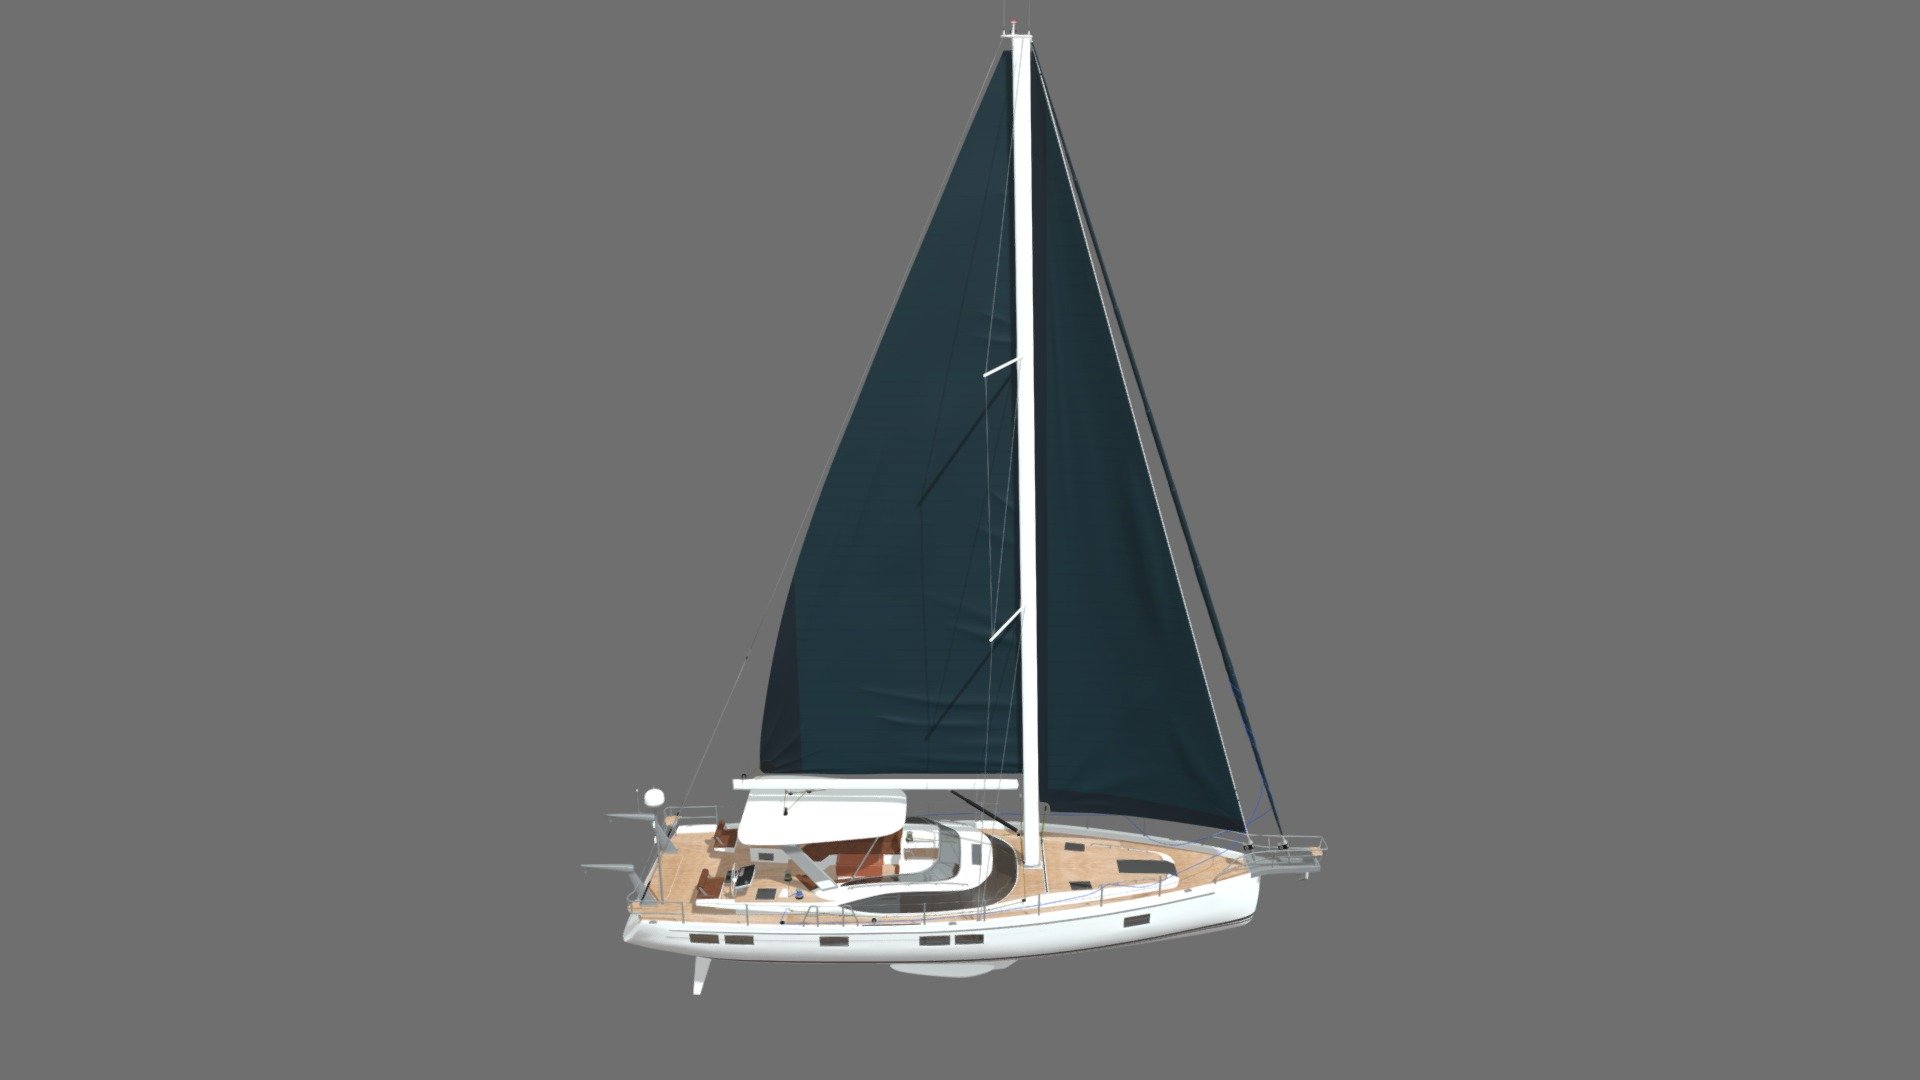 Highly detailed model of a sailing yacht, made in 3ds max 2018, V-ray 3,60. Number of polygons 316646b vertices 315687 3d model